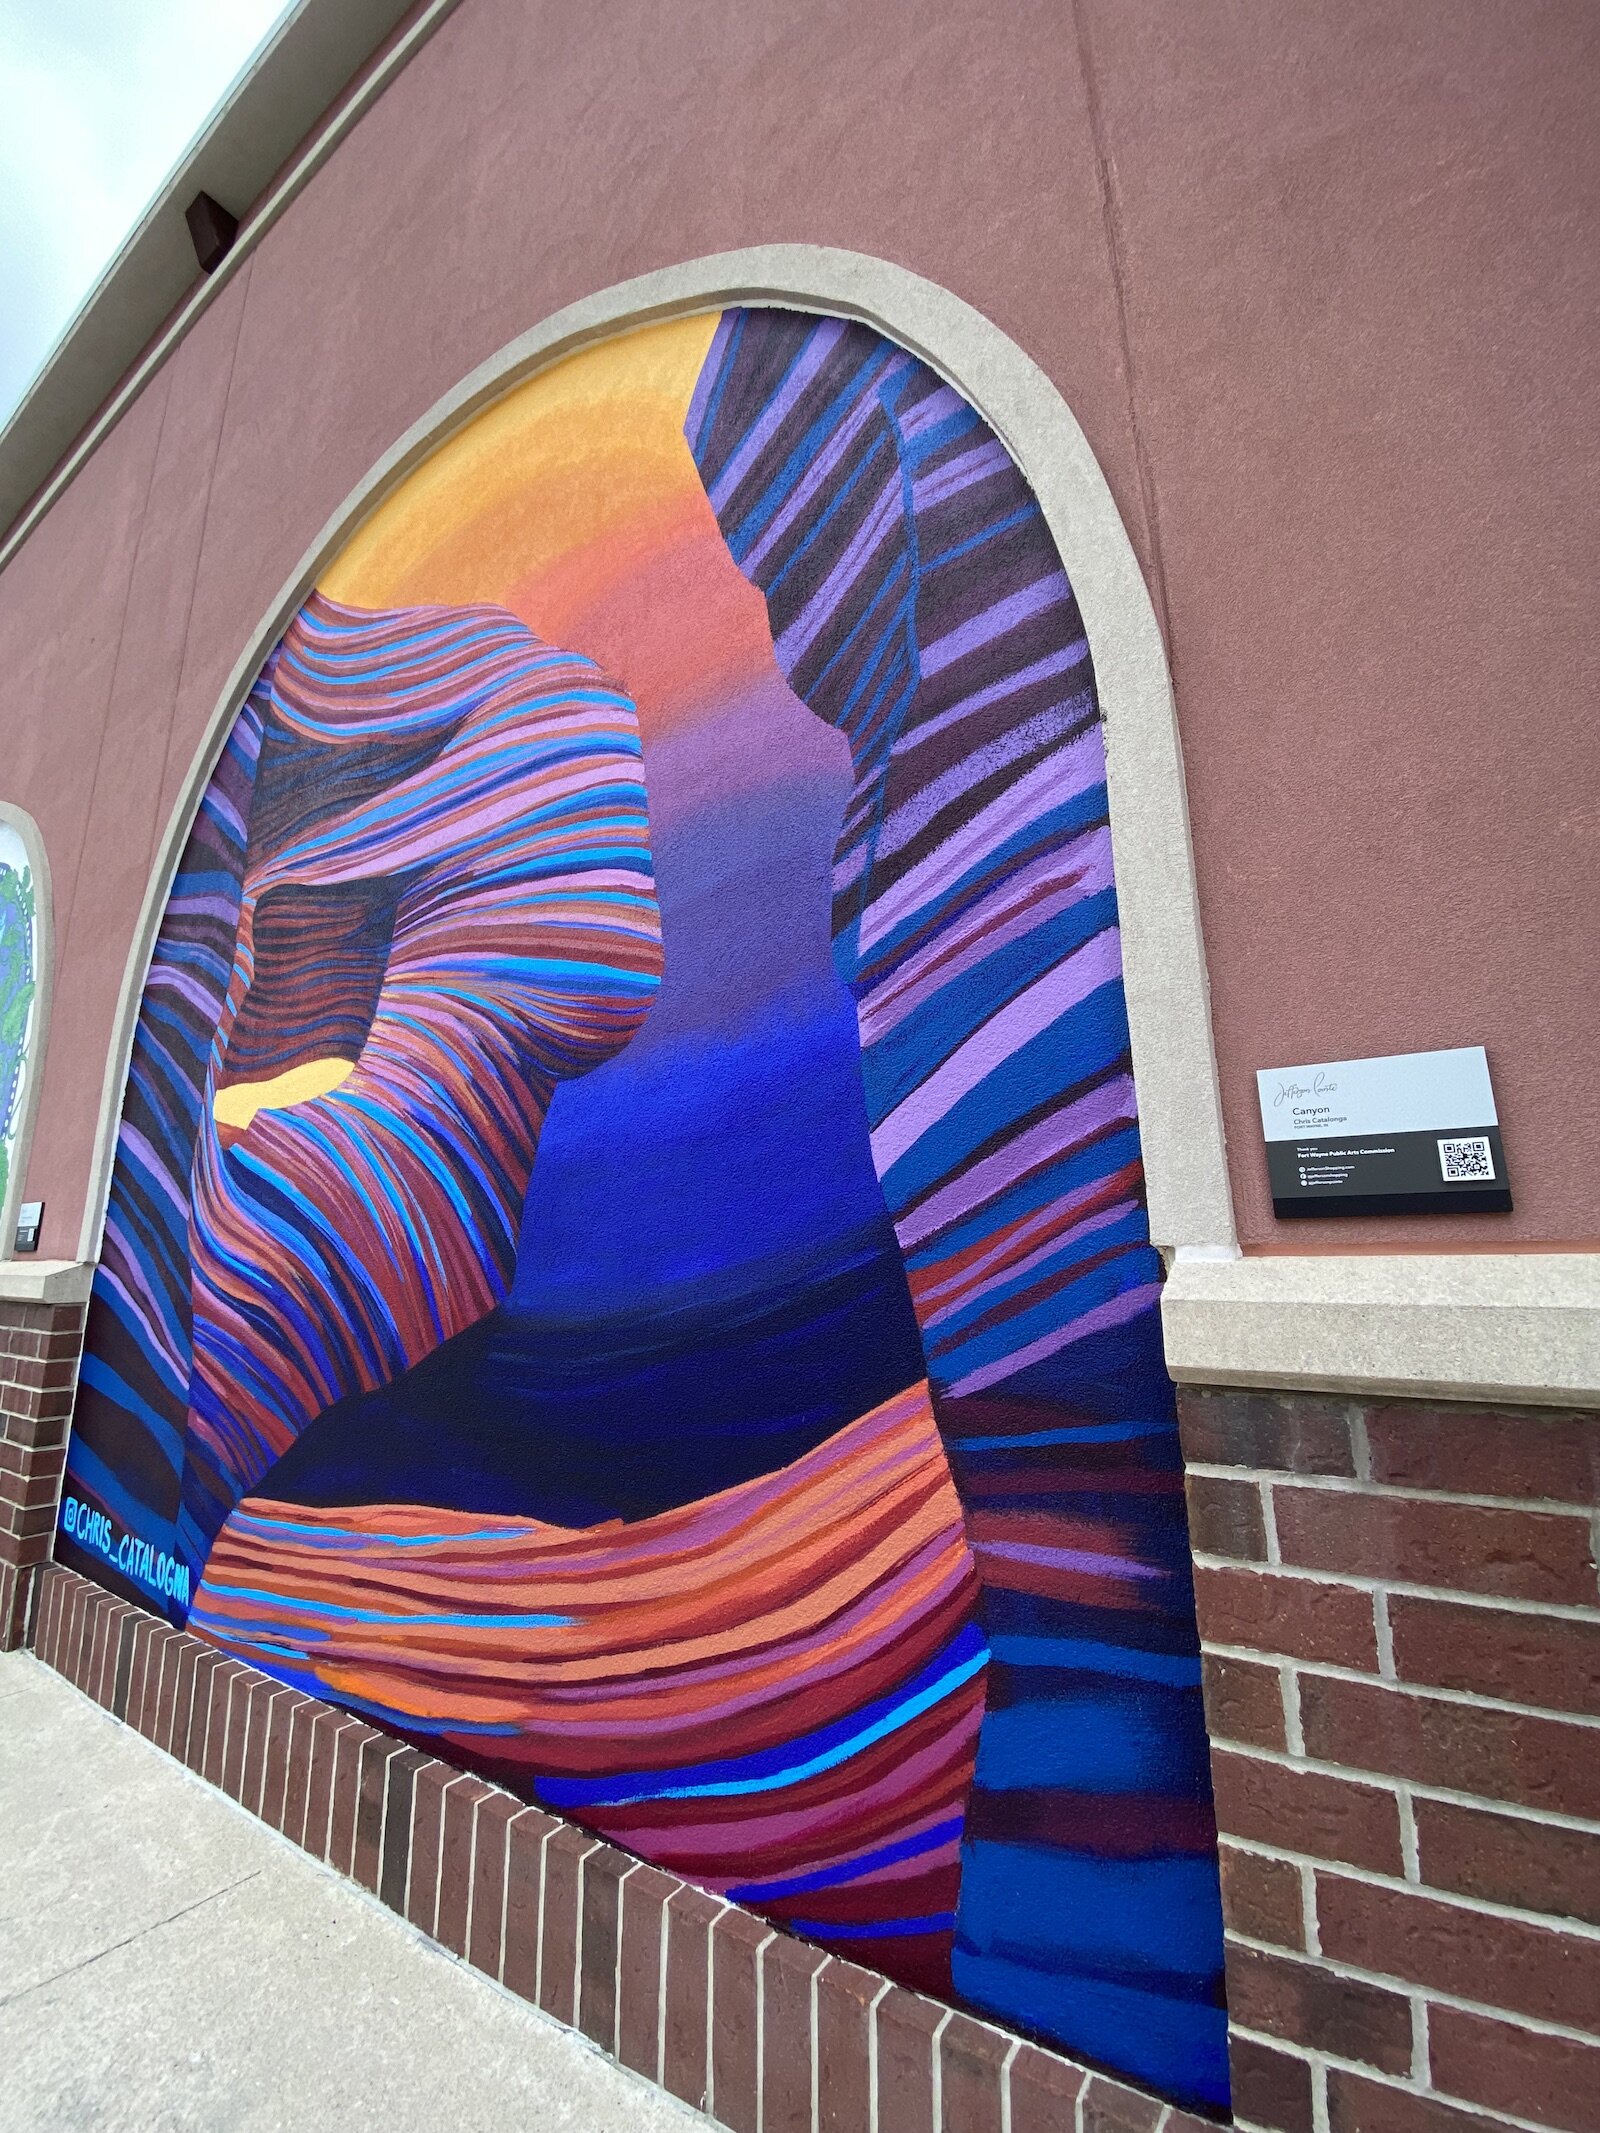 There's a series of new murals at Jefferson Pointe created by Fort Wayne artists.